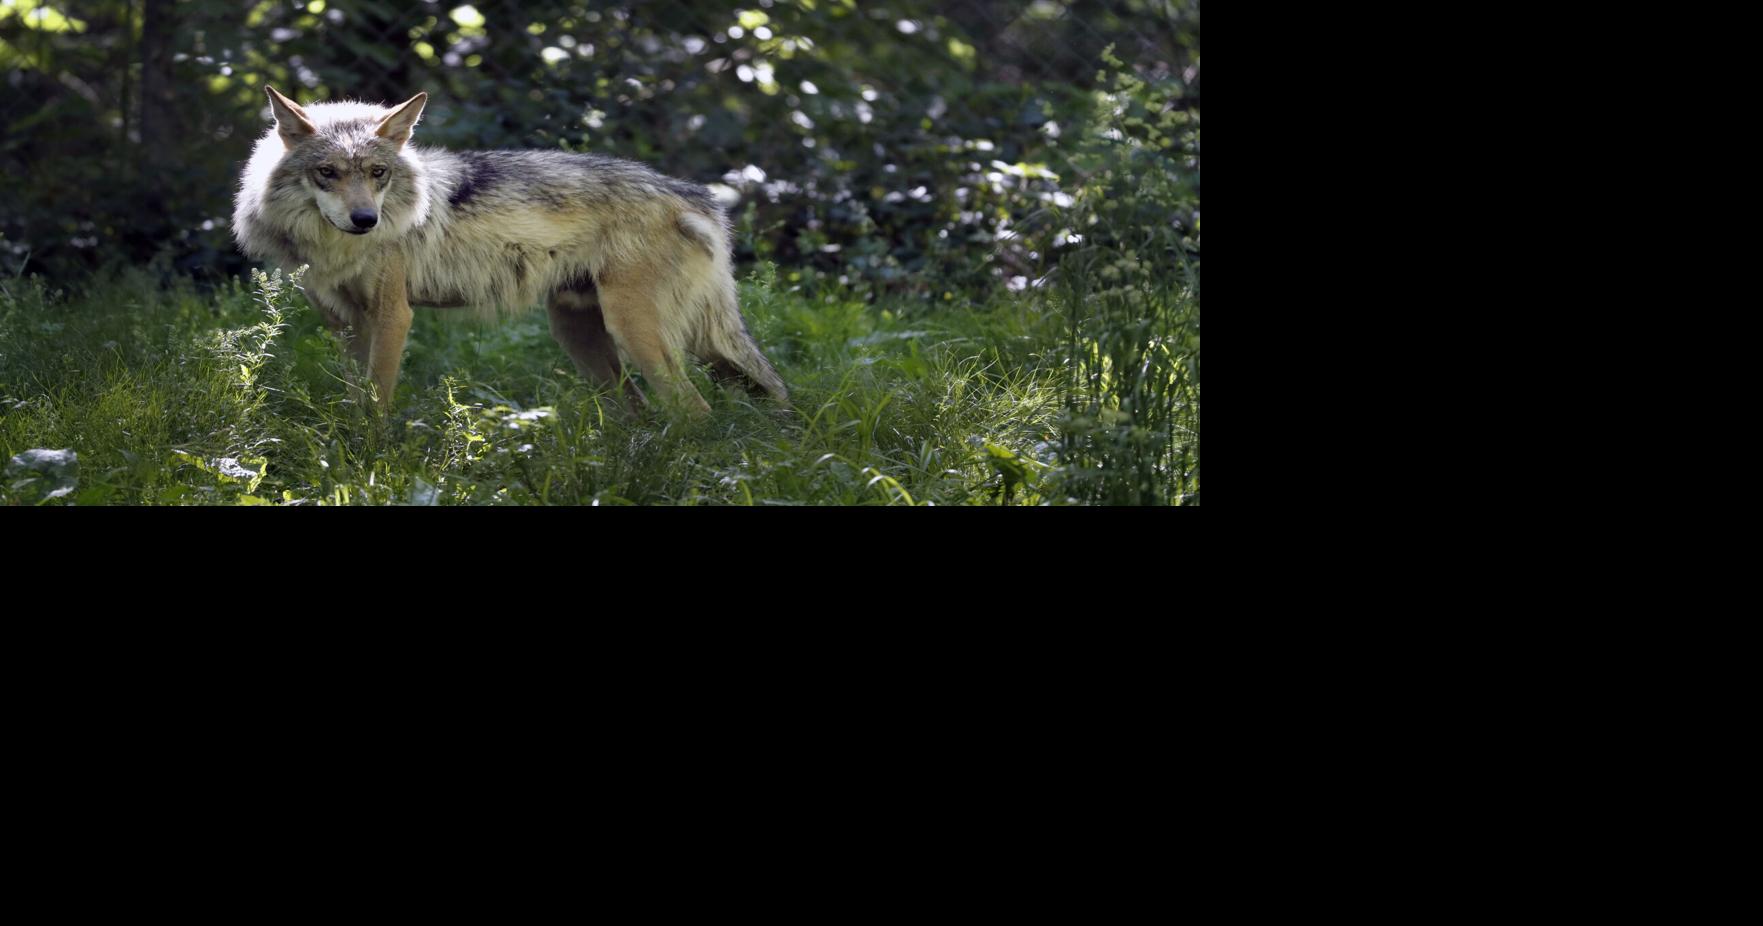 WDFW authorizes second hunt for Smackout wolves after continued cattle killings